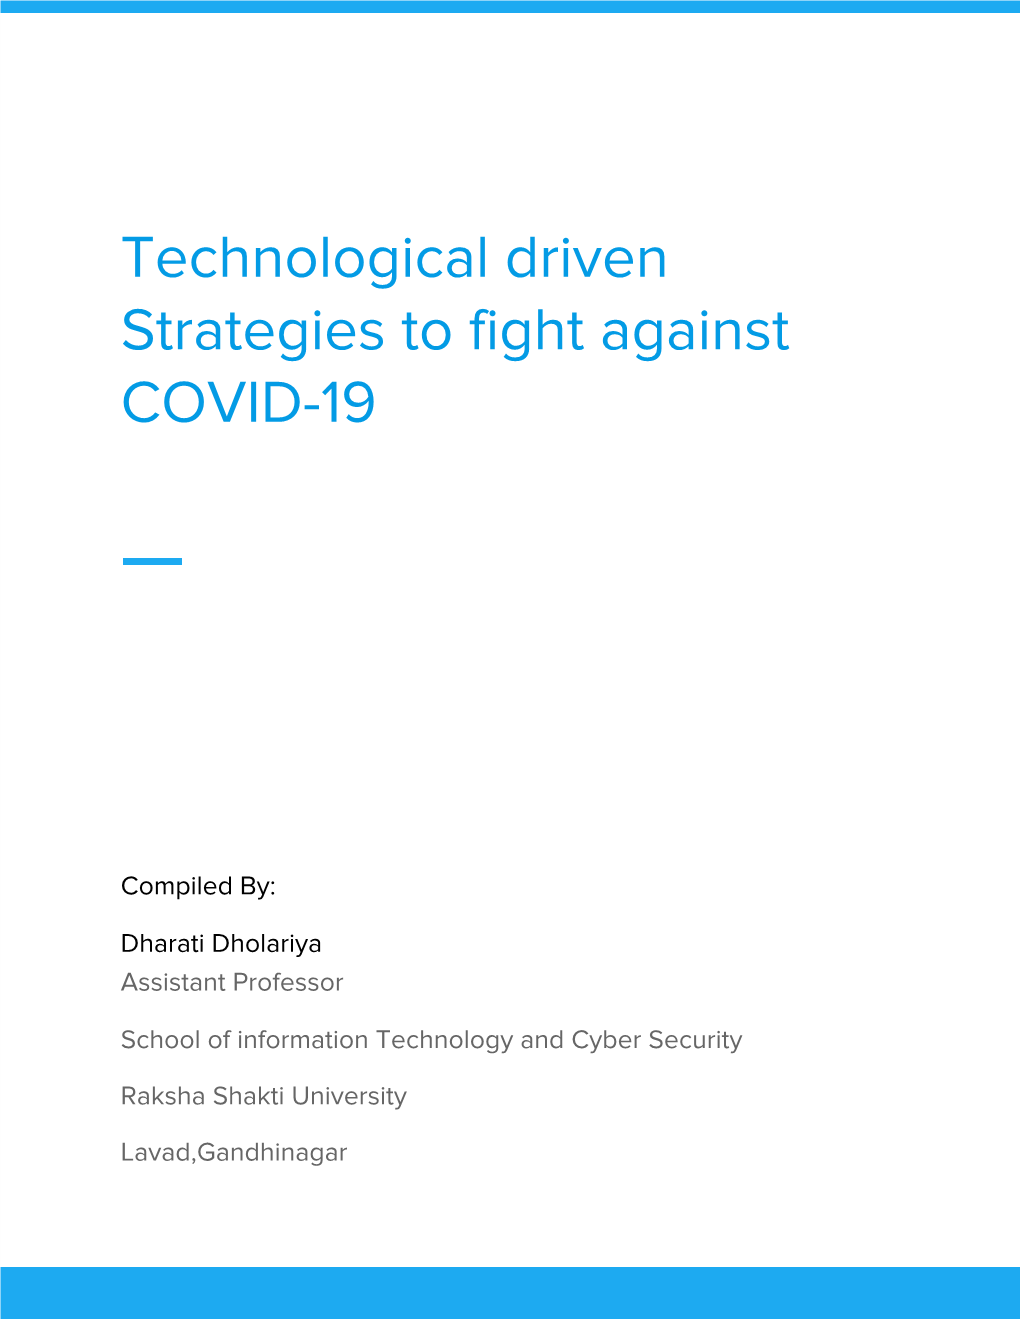 Technological Driven Strategies to Fight Against COVID-19